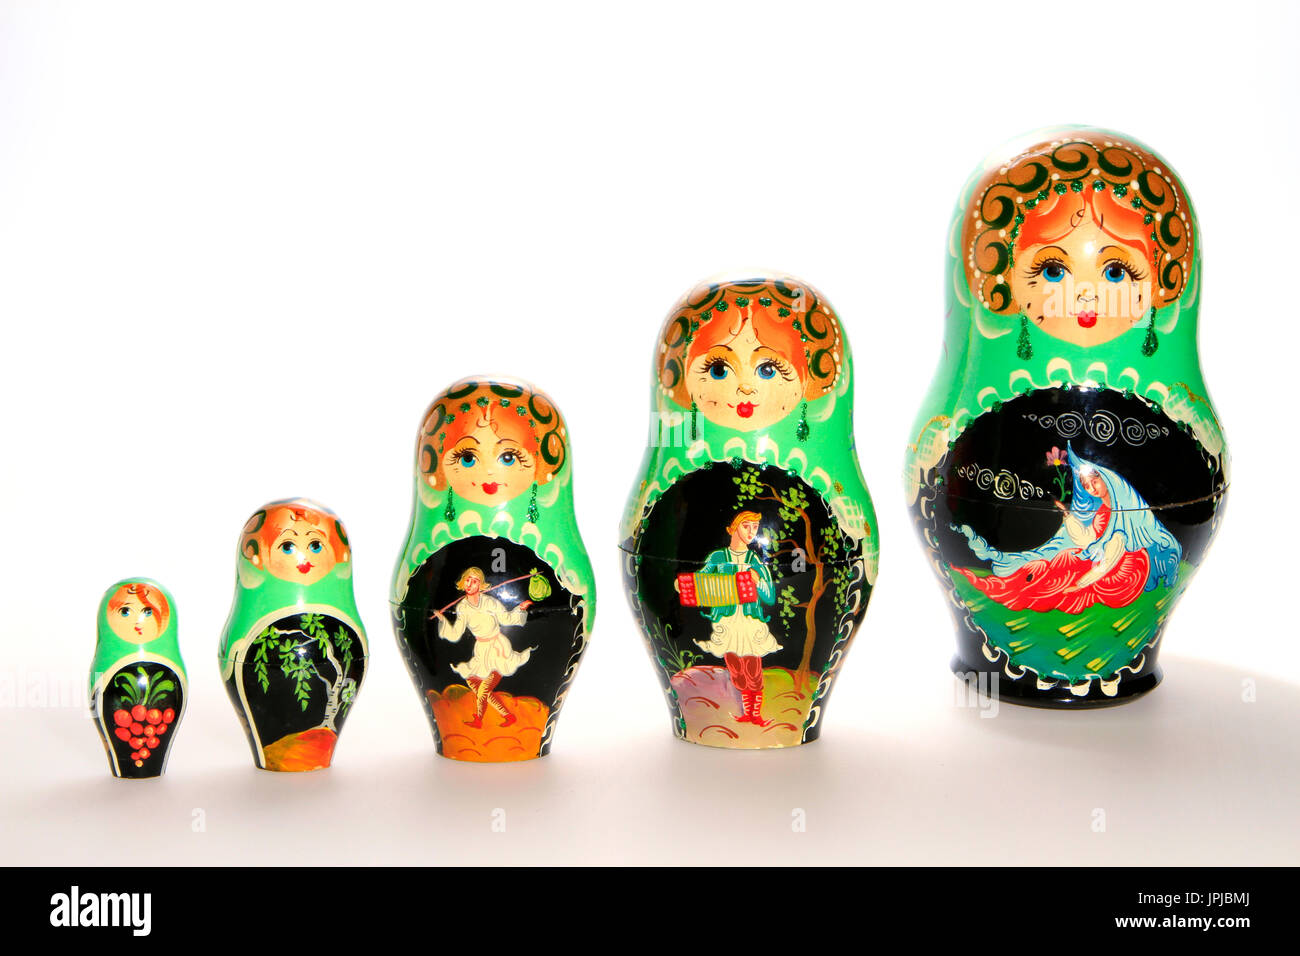 Russian matryoshka dolls, typical souvenir from Russia Stock Photo